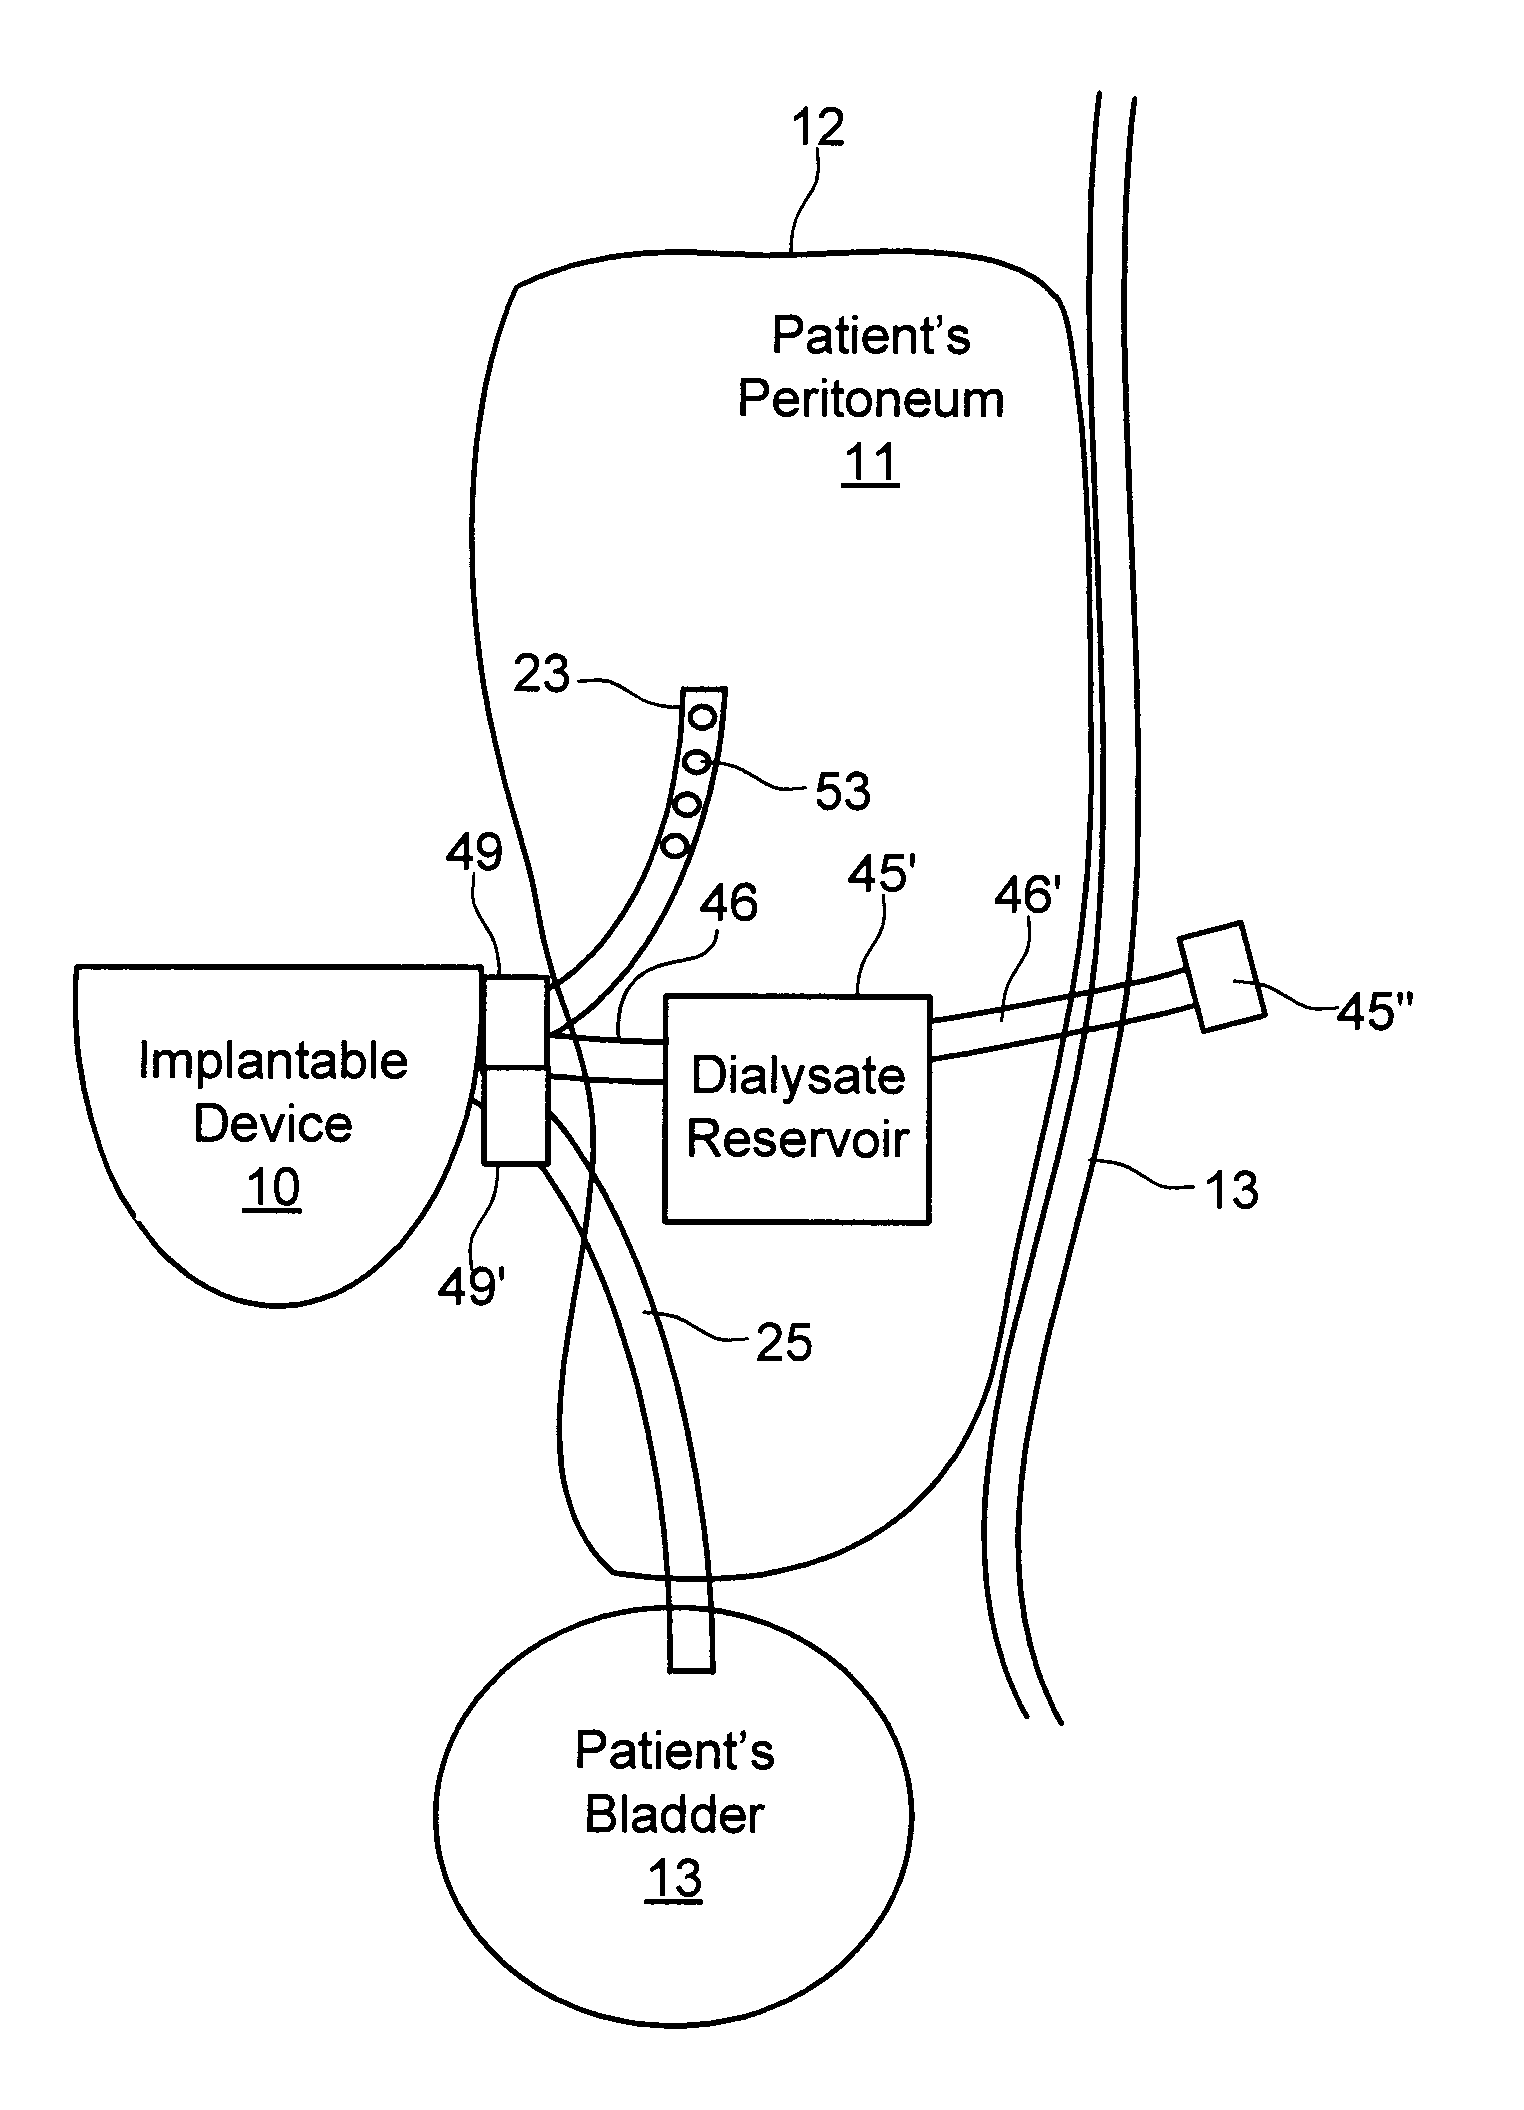 Systems and methods for treating chronic liver failure based on peritoneal dialysis